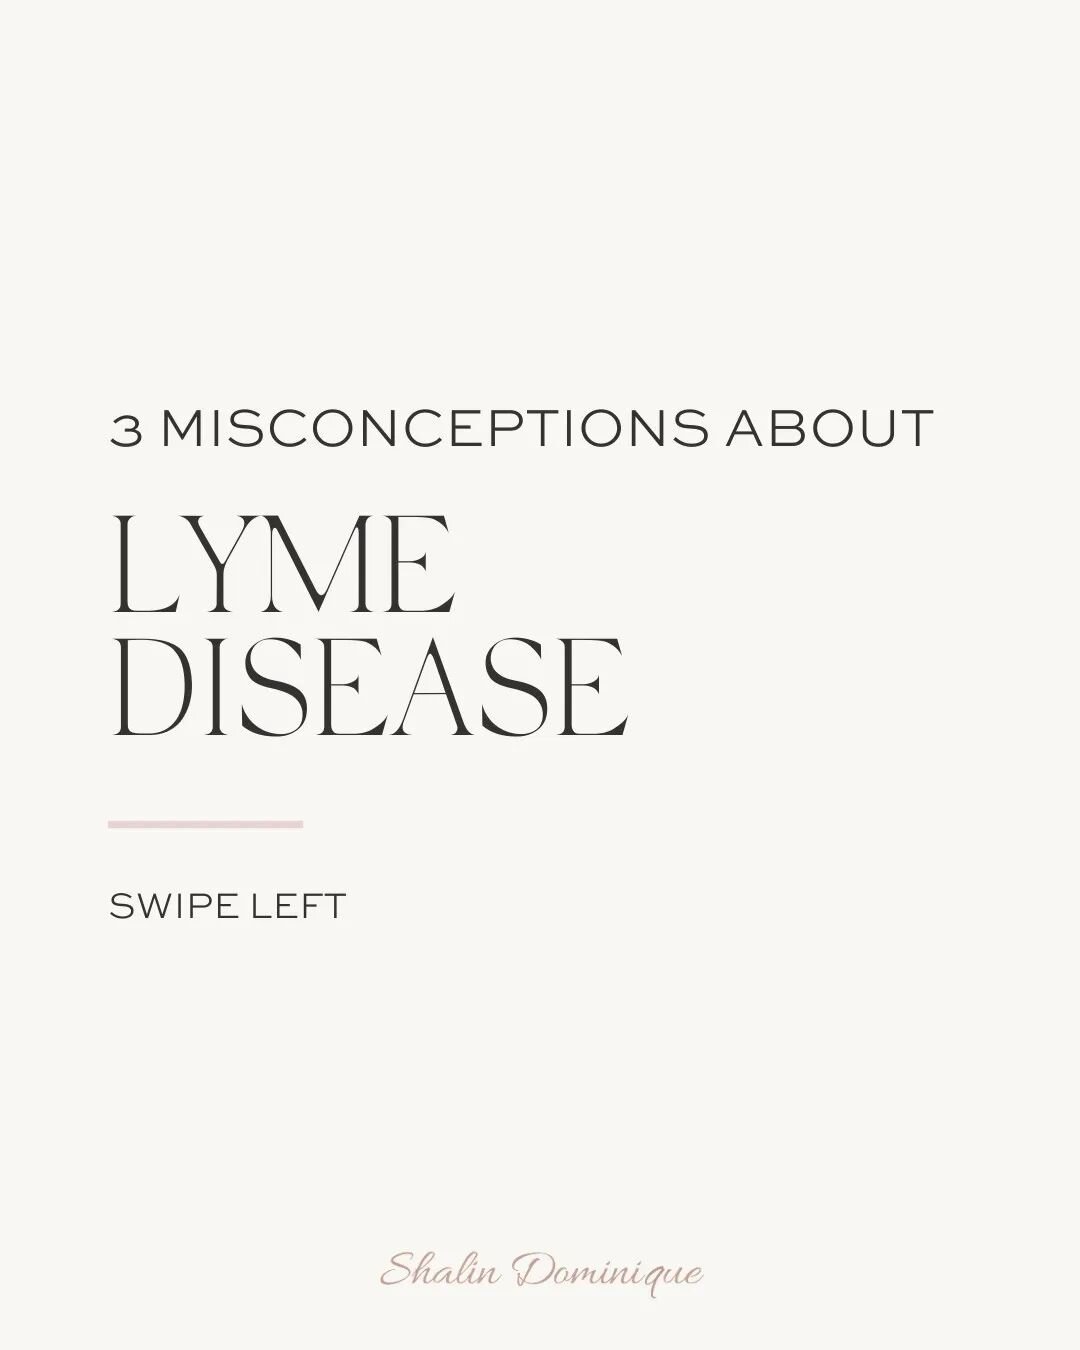 Lyme disease - it may be a complex and stubborn health obstacle, but by no means is it impossible to overcome!

By approaching Lyme holistically and tackling it at the root, you can completely reverse your symptoms (and the stubborn fat that often co